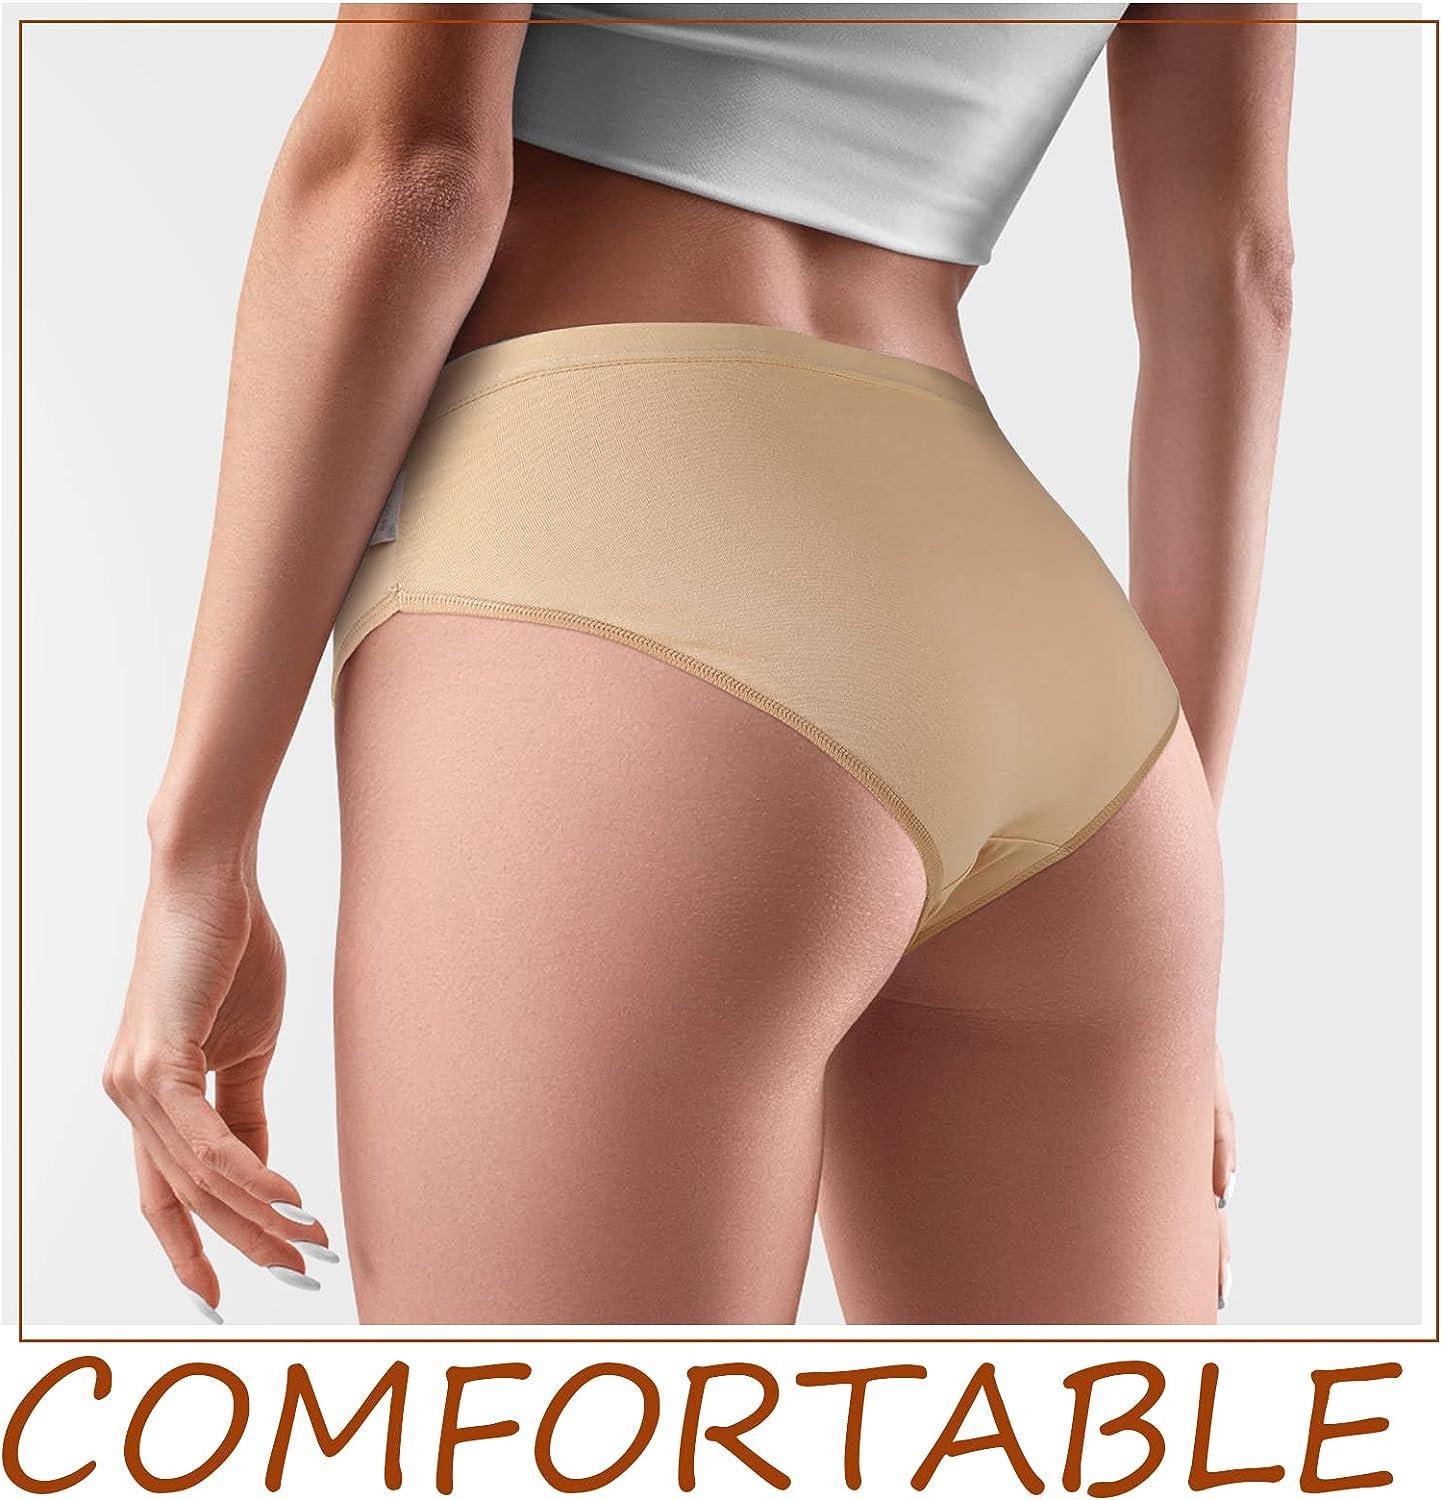 100% Cotton Underwear Panties For Women Middle Aged Elderly Mid-Waisted  Ladies Briefs Panty Sleep Underpants Lingerie